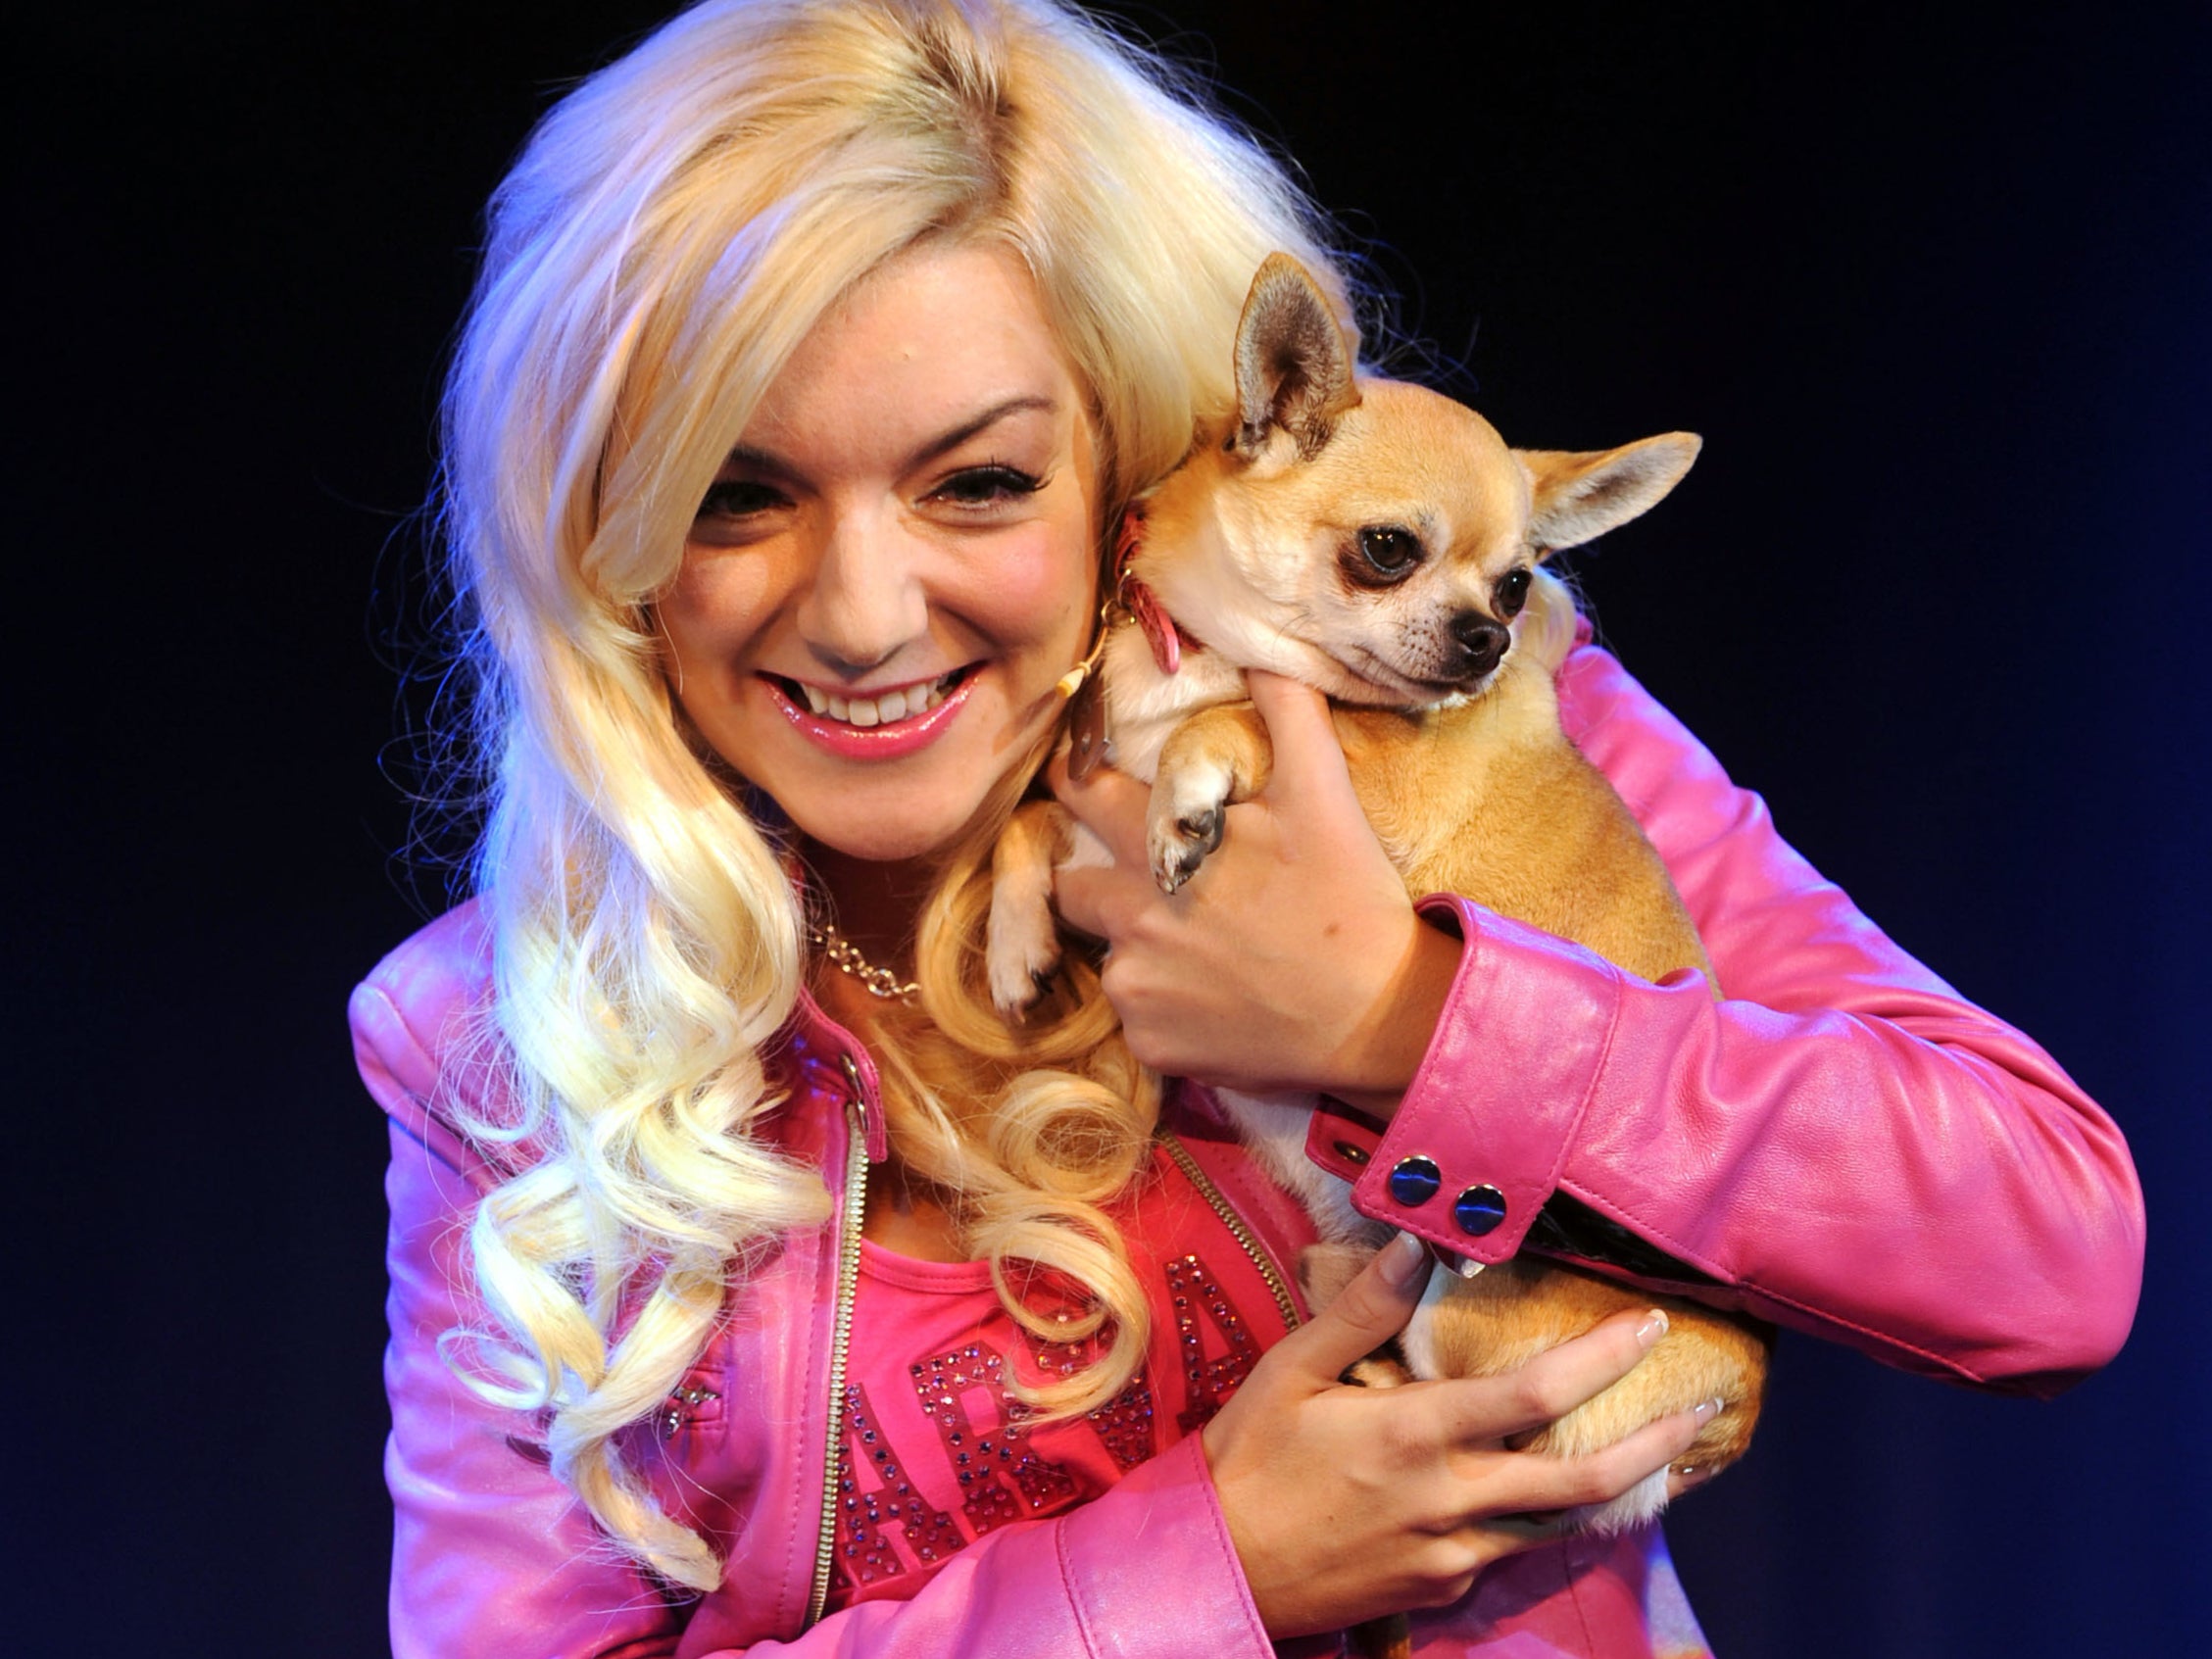 Sheridan Smith as Elle Woods during the ‘Legally Blonde: The Musical’ photocall event in central London.